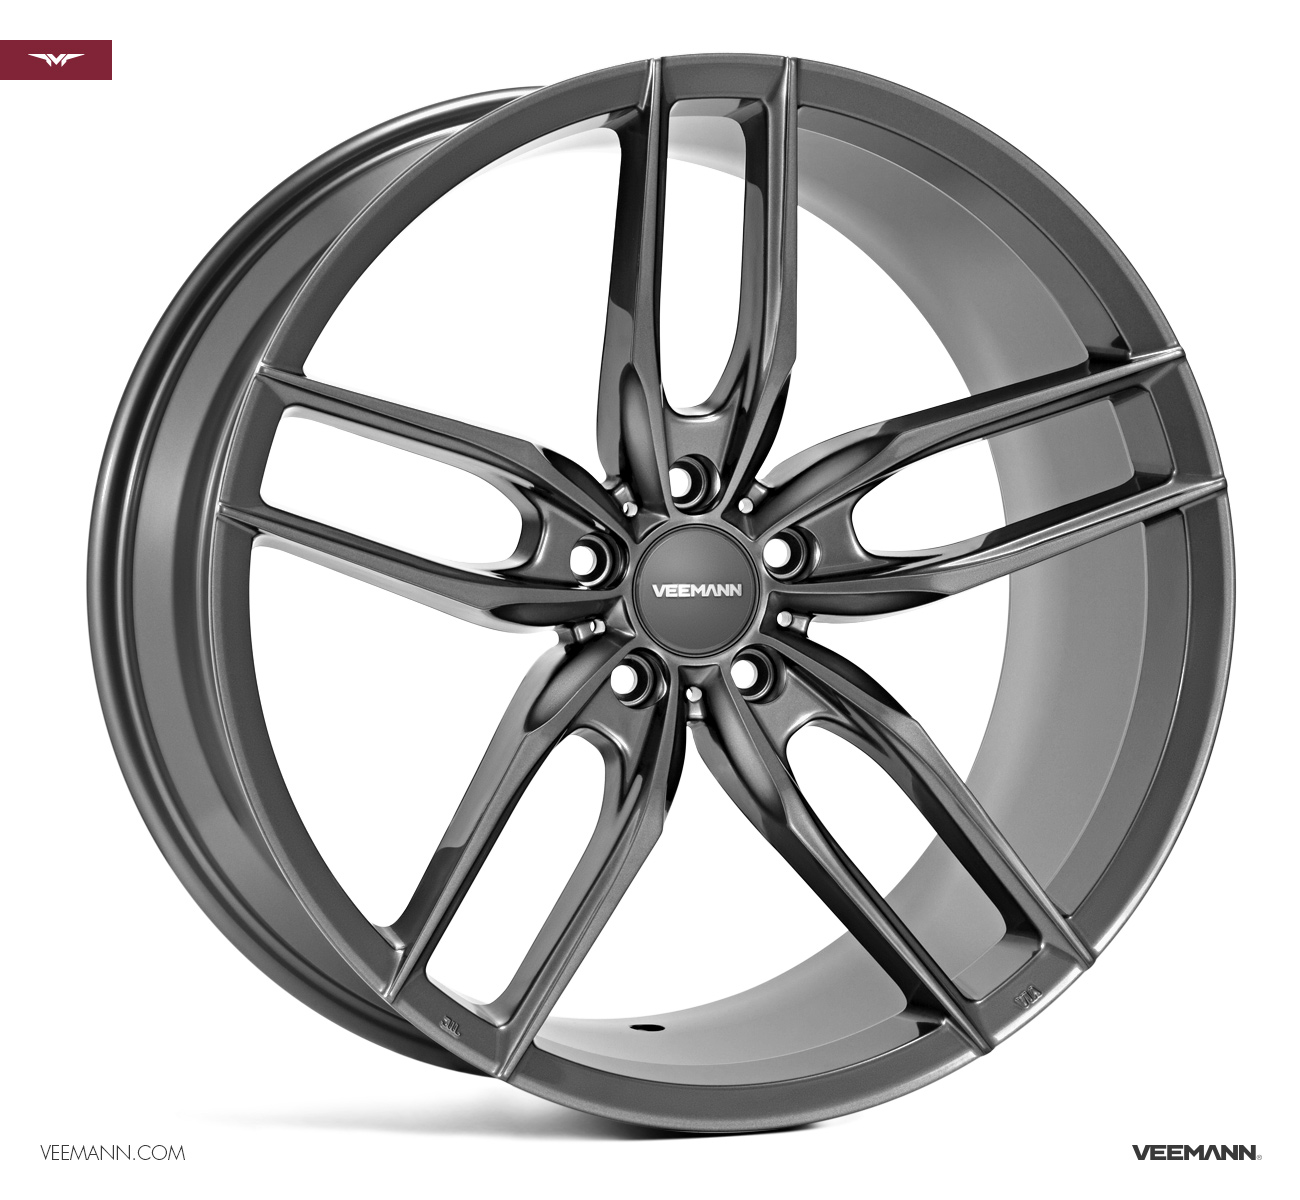 NEW 19" VEEMANN V-FS28 ALLOY WHEELS IN GLOSS GRAPHITE WITH DEEPER CONCAVE 9.5" REARS